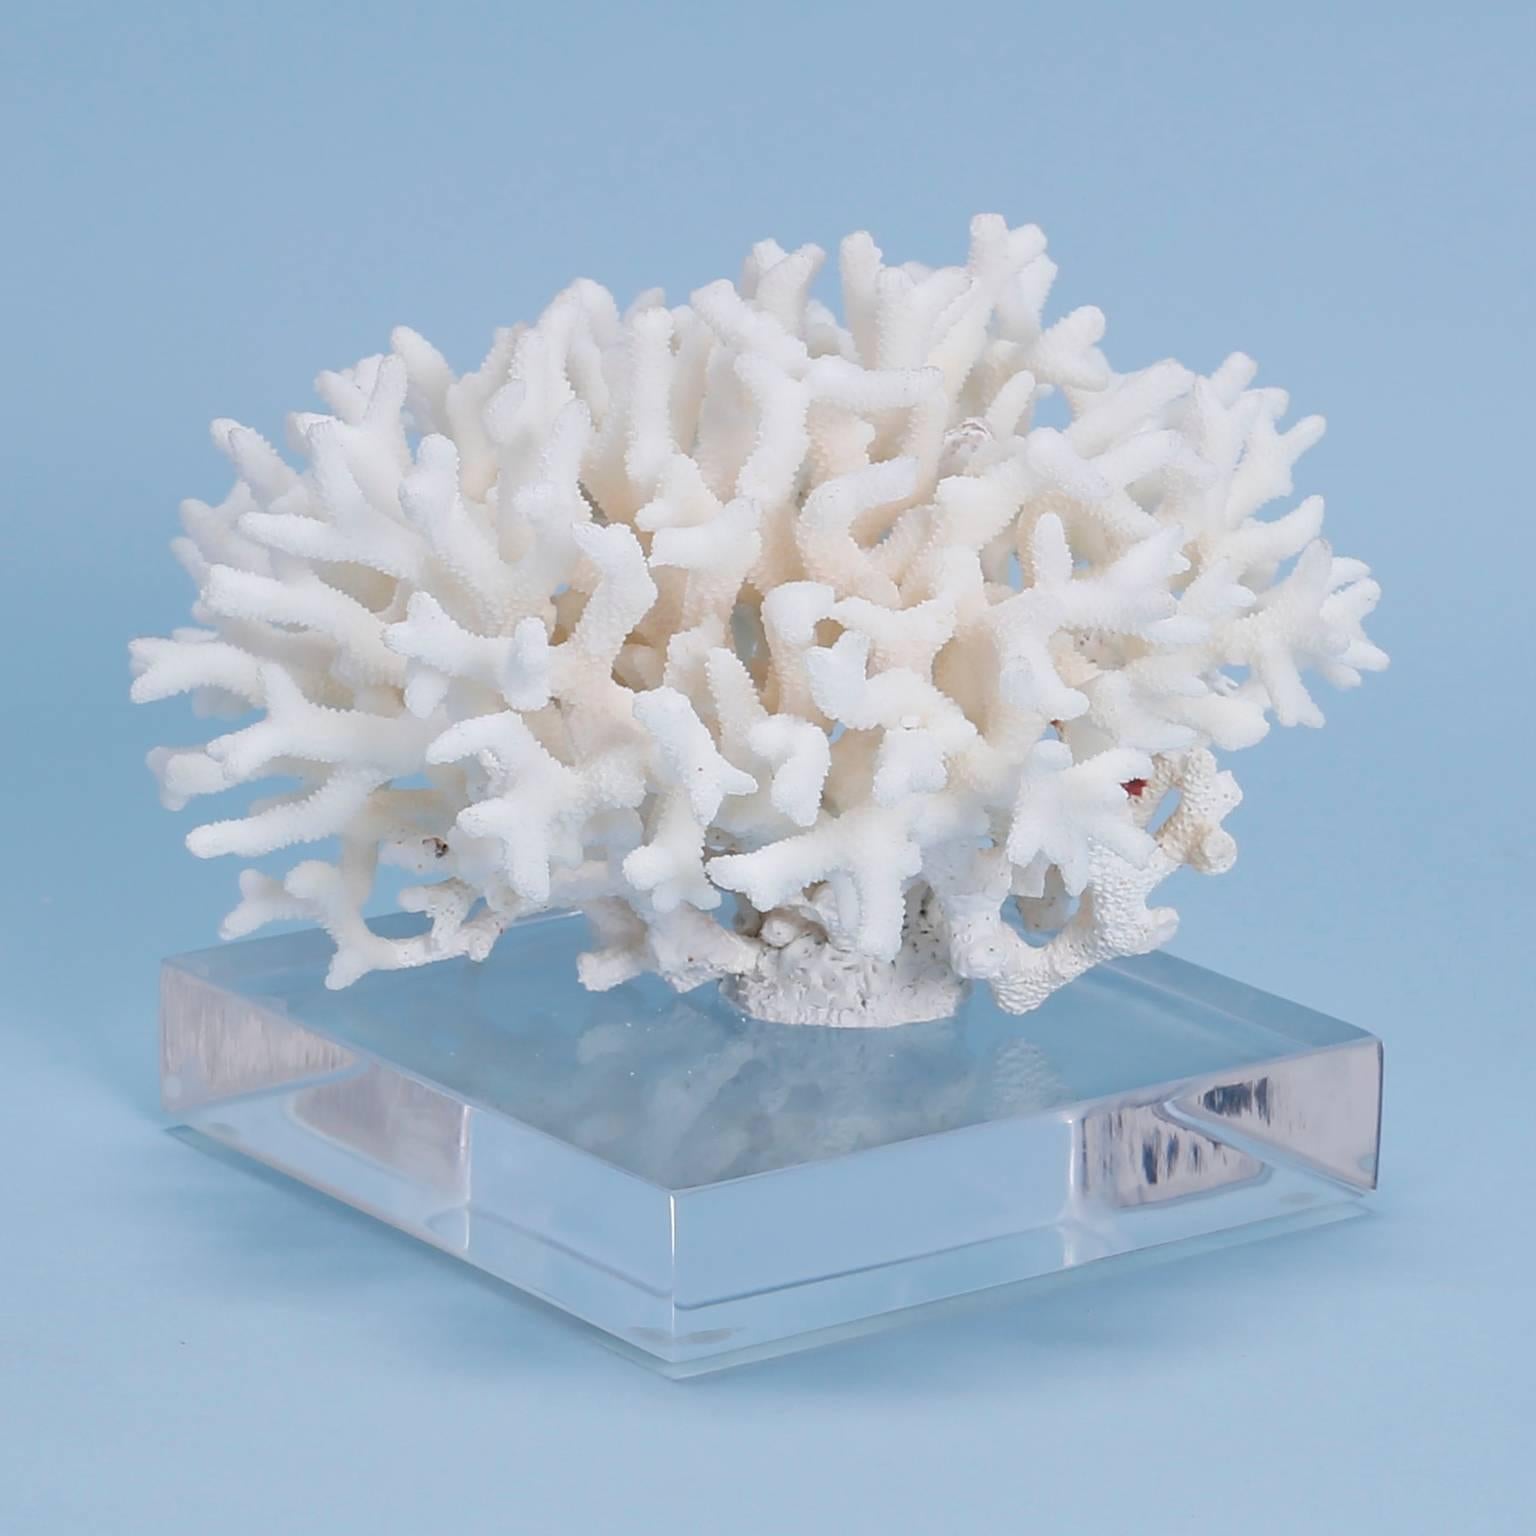 A birdsnest coral specimen with a petite delicate structure, organic textures, and
crisp white palette. Presented on a Lucite base. 

Coral cannot be exported out of the USA without Cities permits. These permits are expensive and time consuming,